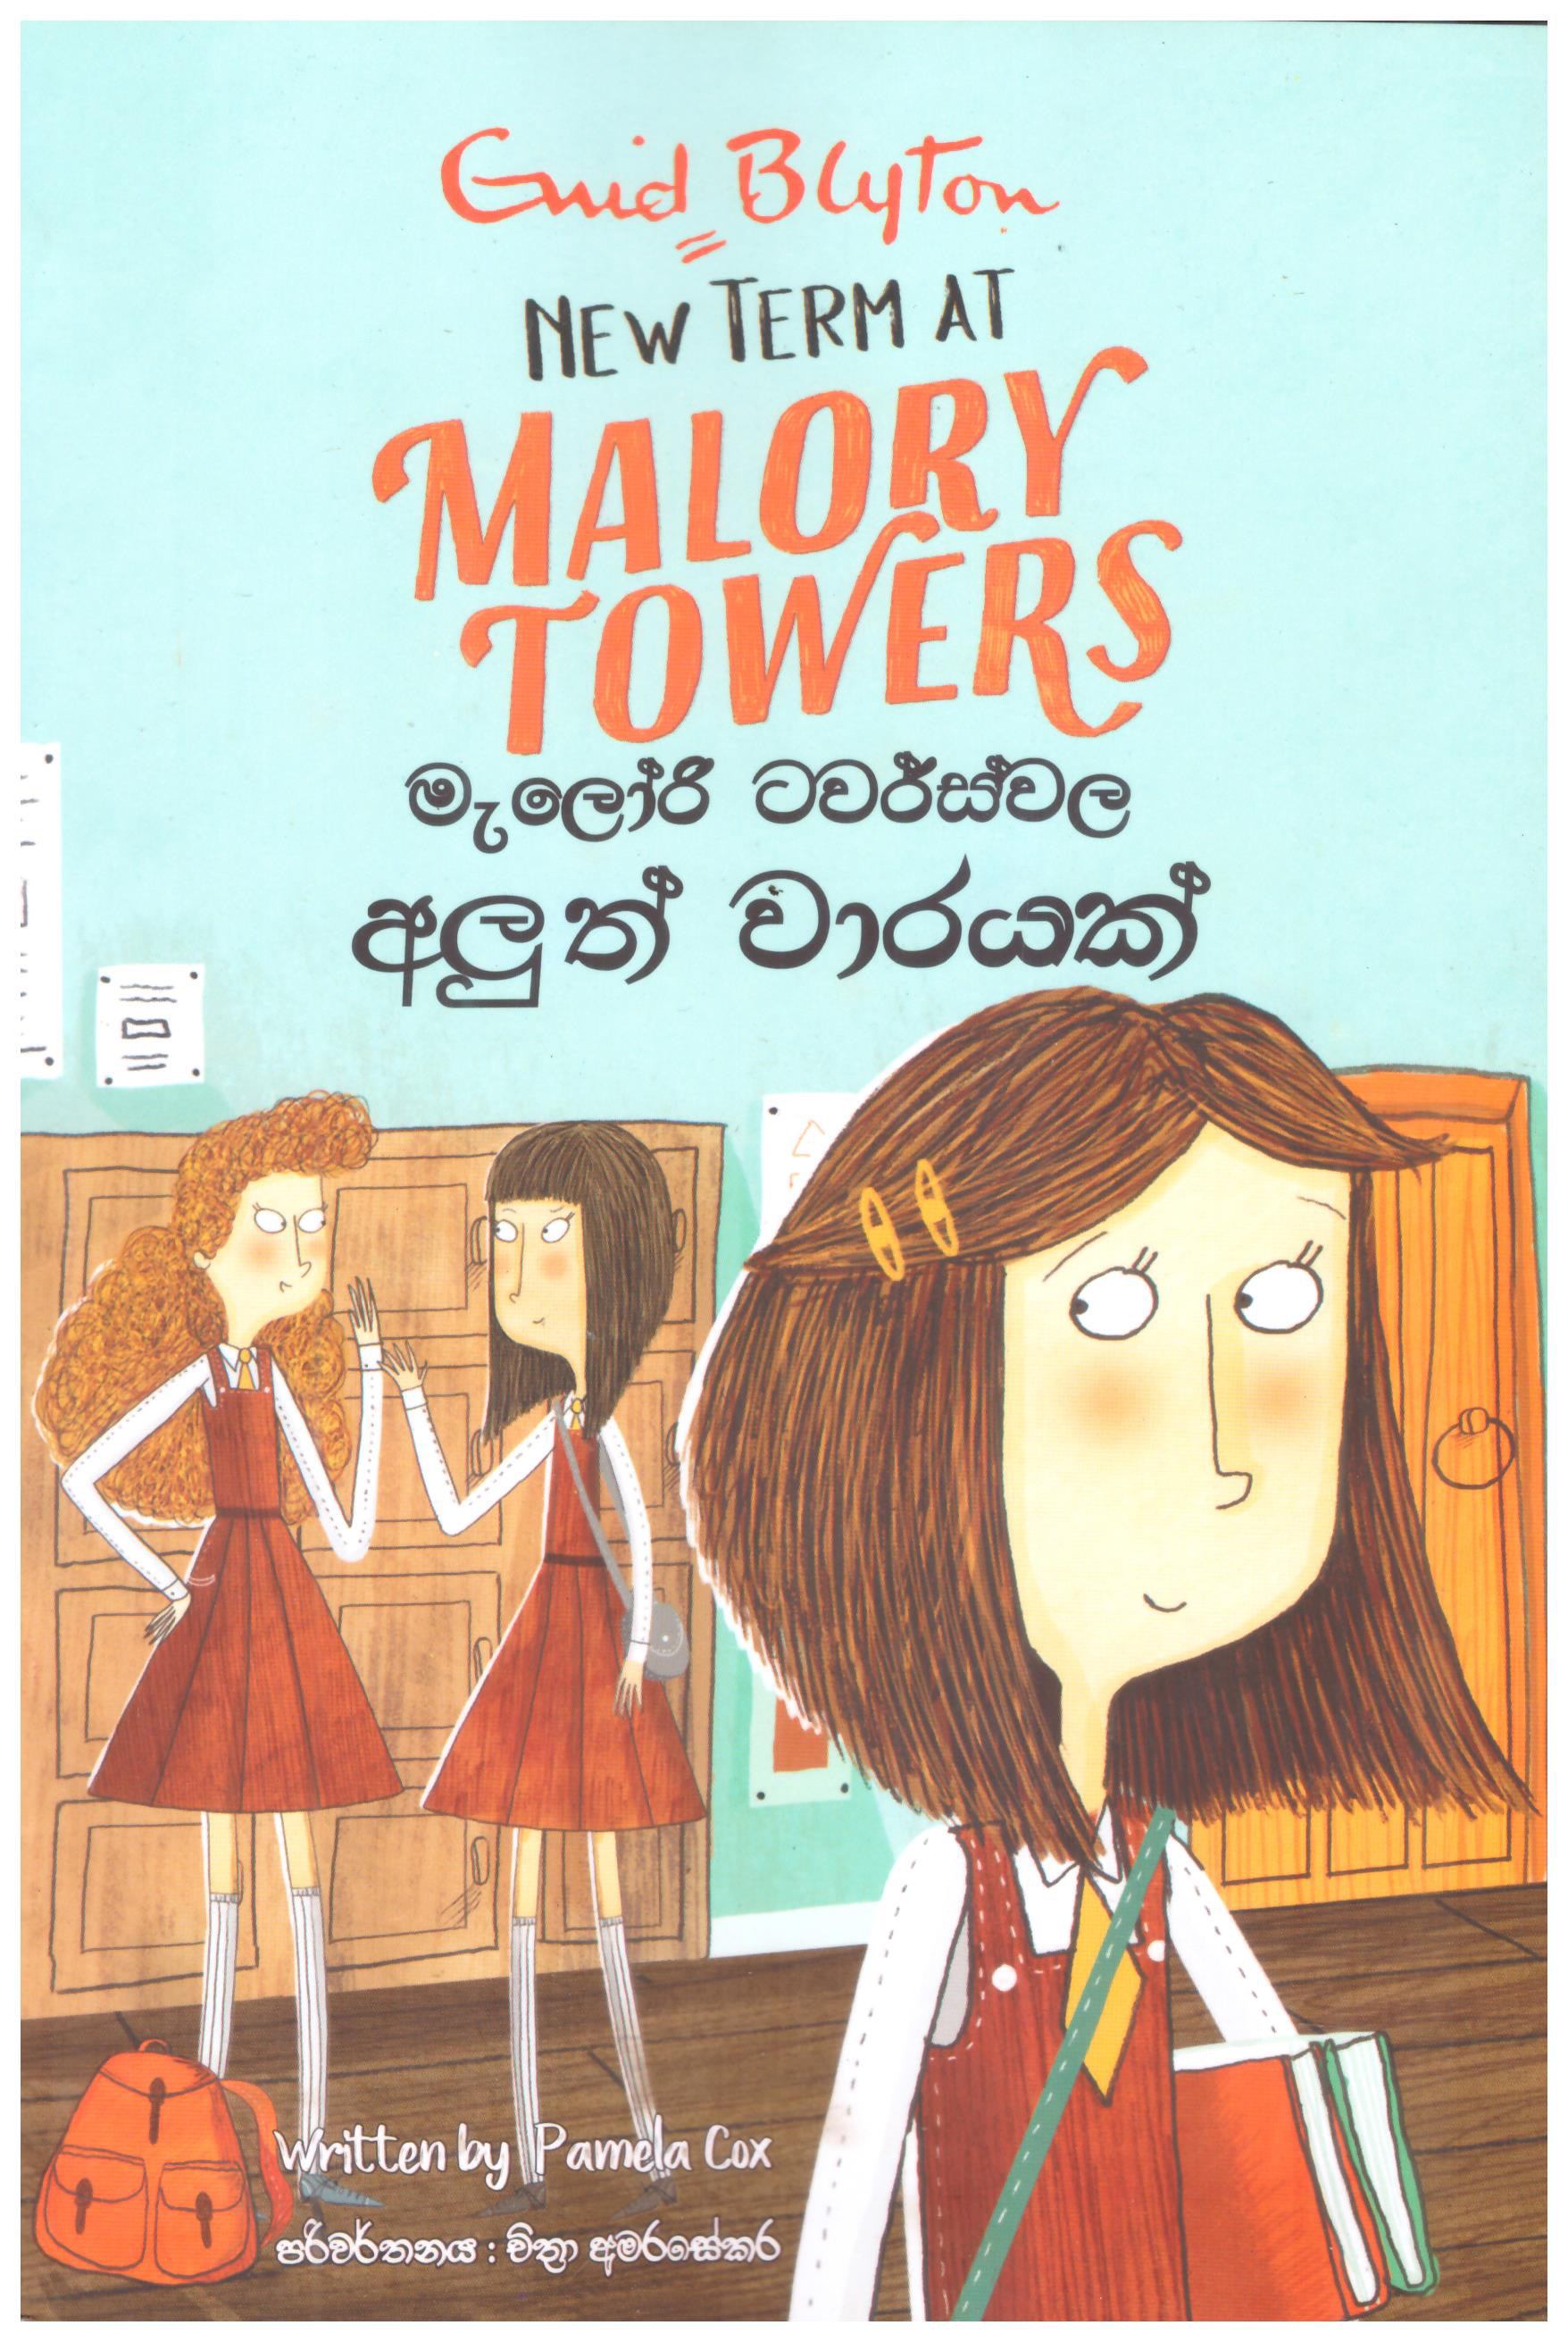 Melory Towarswala Aluth Warayak Translation of New Term At Malory Towers By Enid Blyton